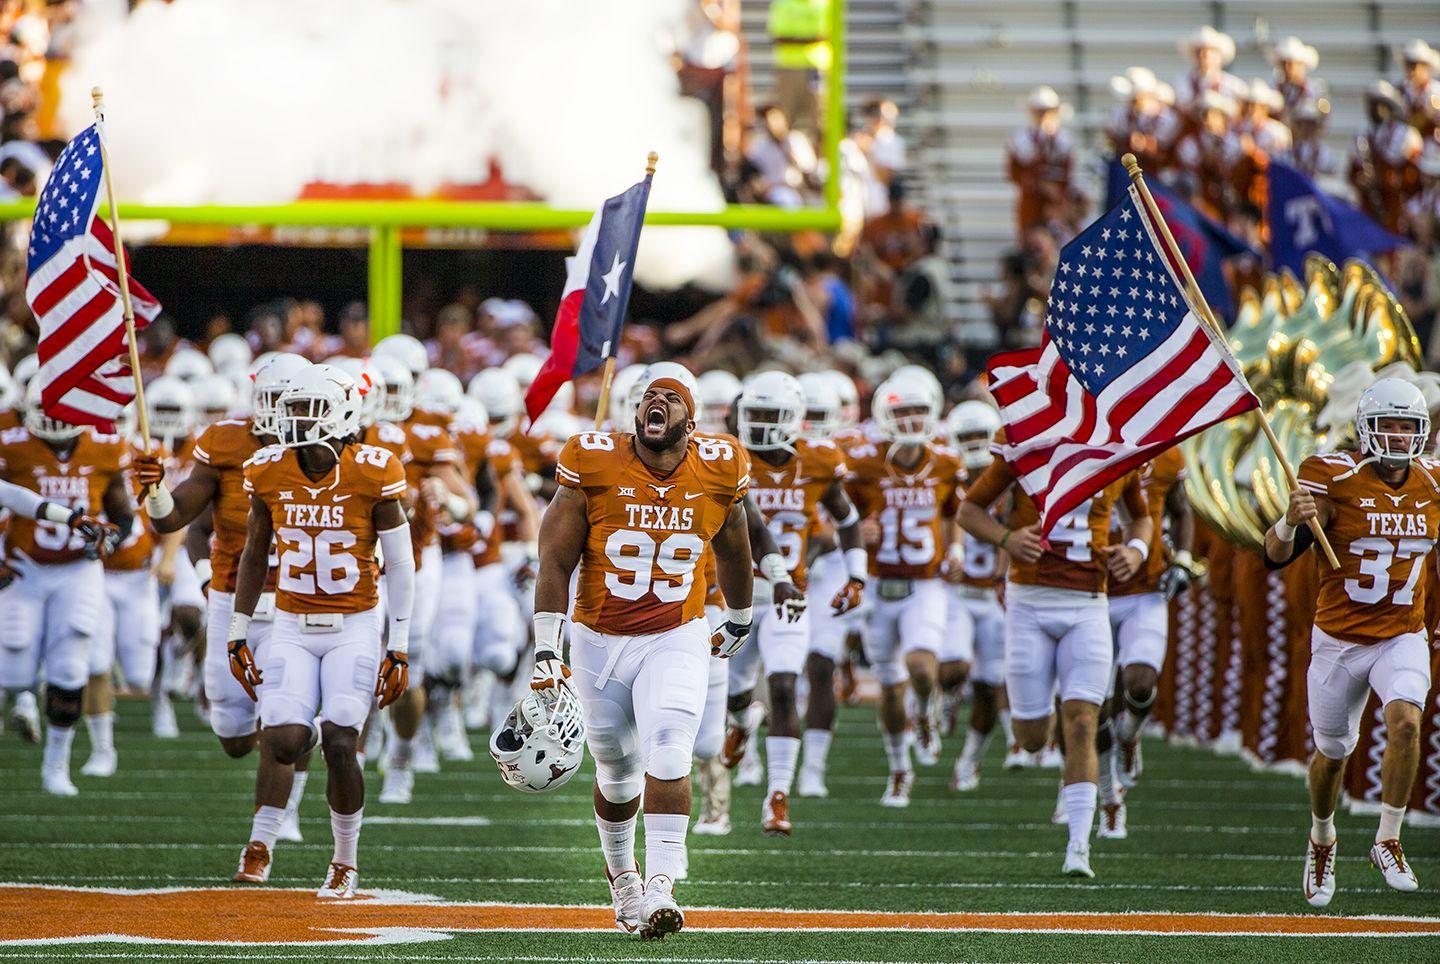 A Look At The Texas Longhorns On The Eve Of National Signing Day